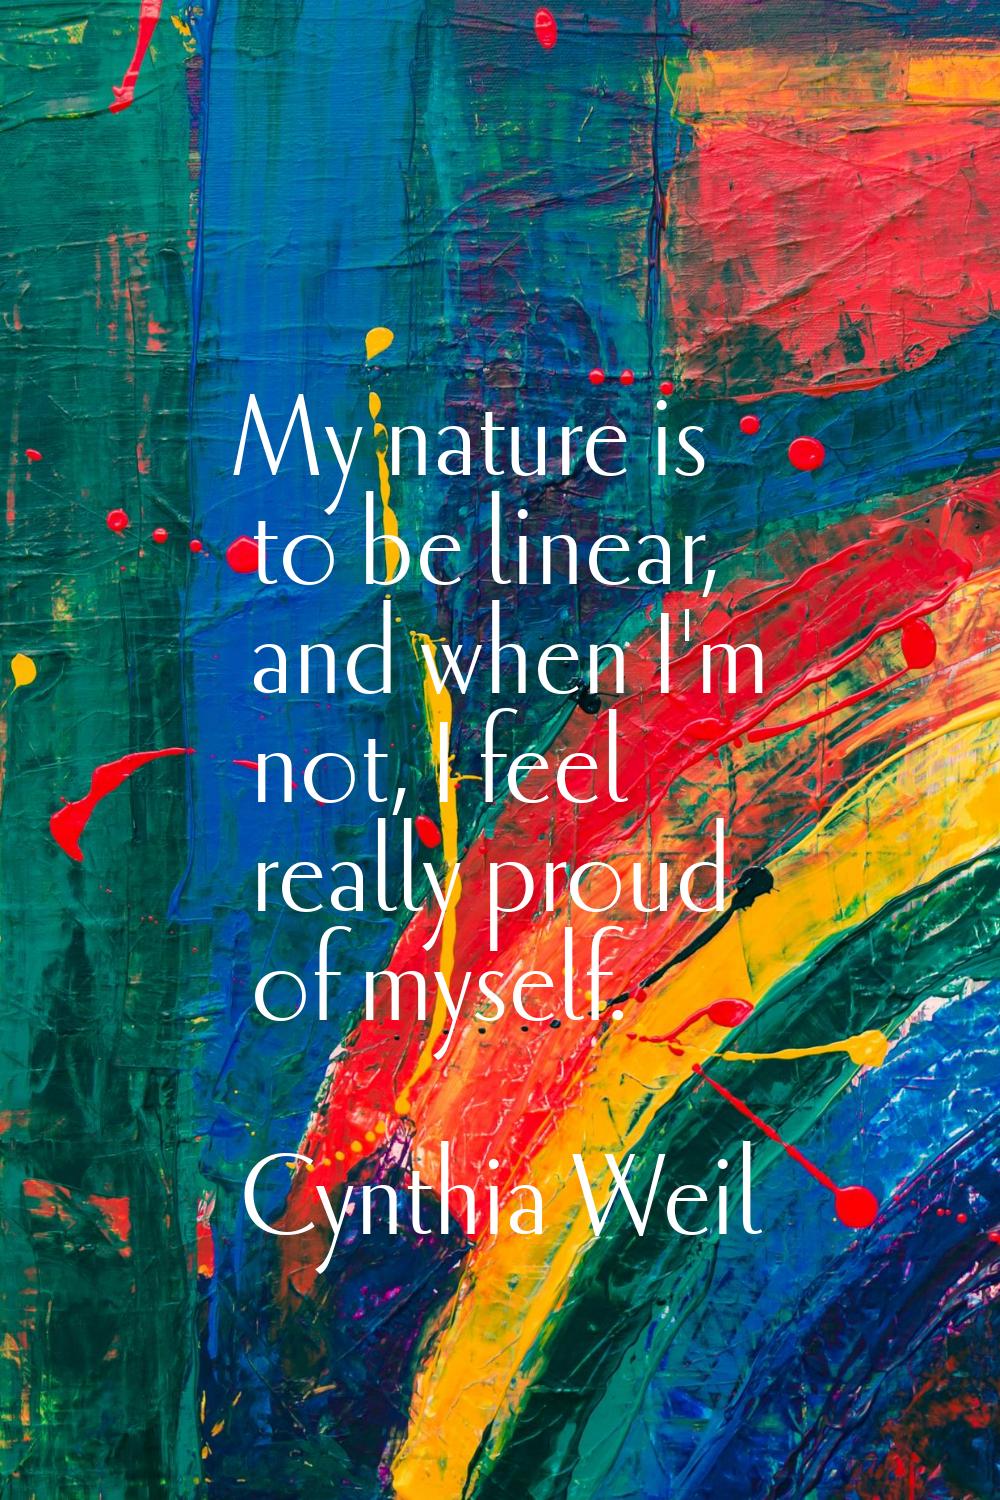 My nature is to be linear, and when I'm not, I feel really proud of myself.